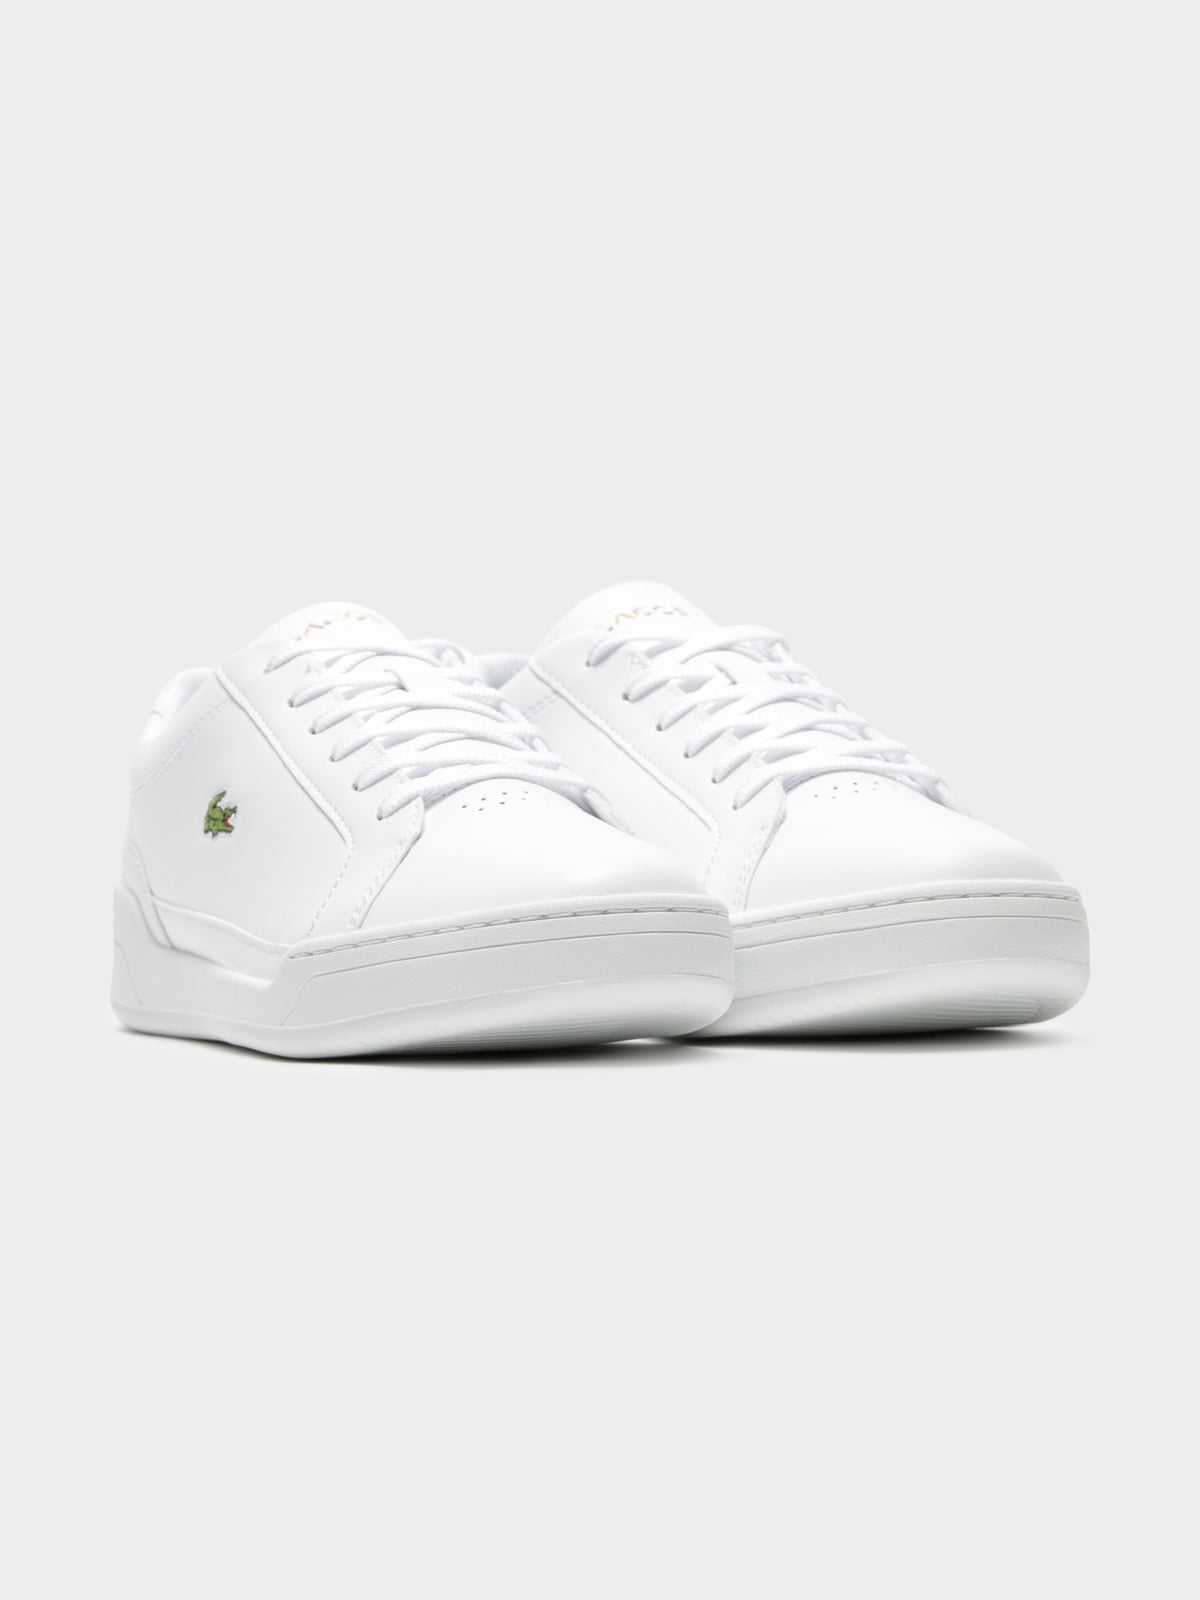 Mens Challenge 319 5 SFA Leather Sneaker in White